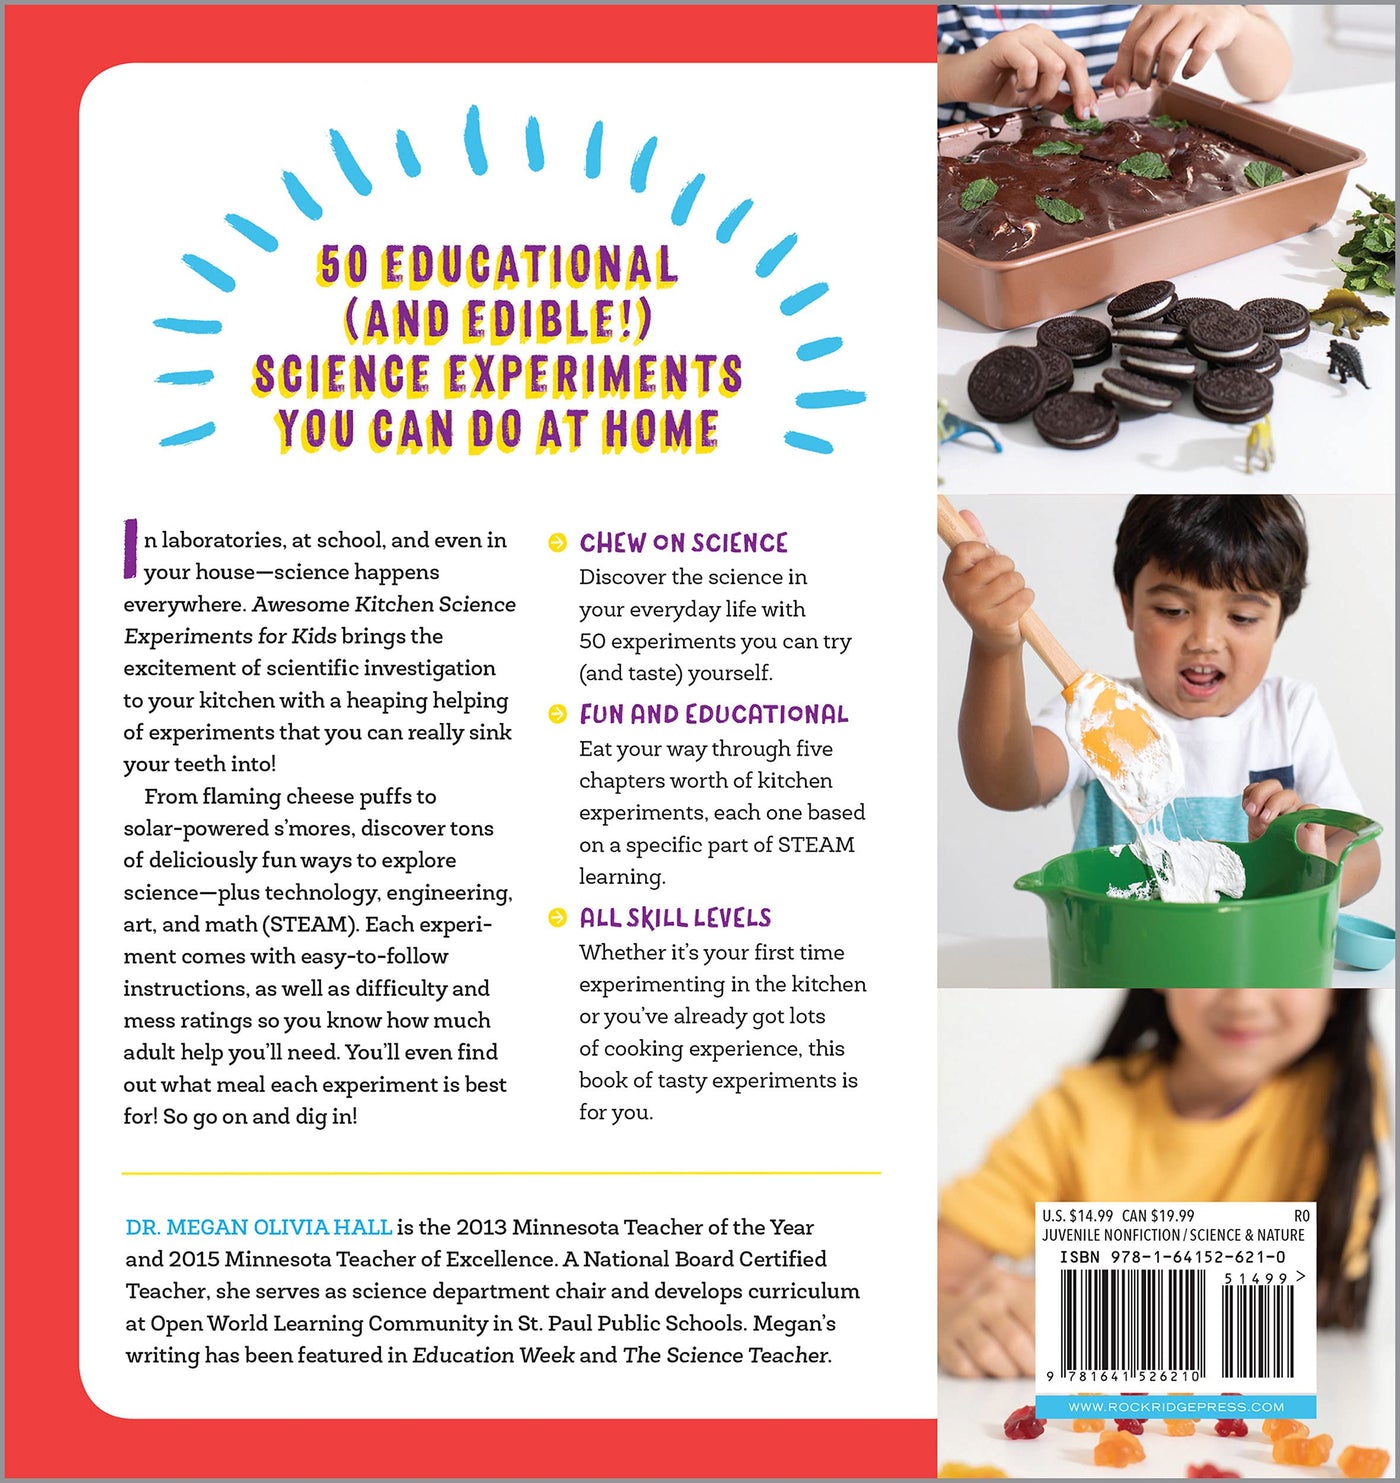 Awesome Kitchen Science Experiments for Kids: 50 STEAM Projects You Can Eat! (Spiral Bound)